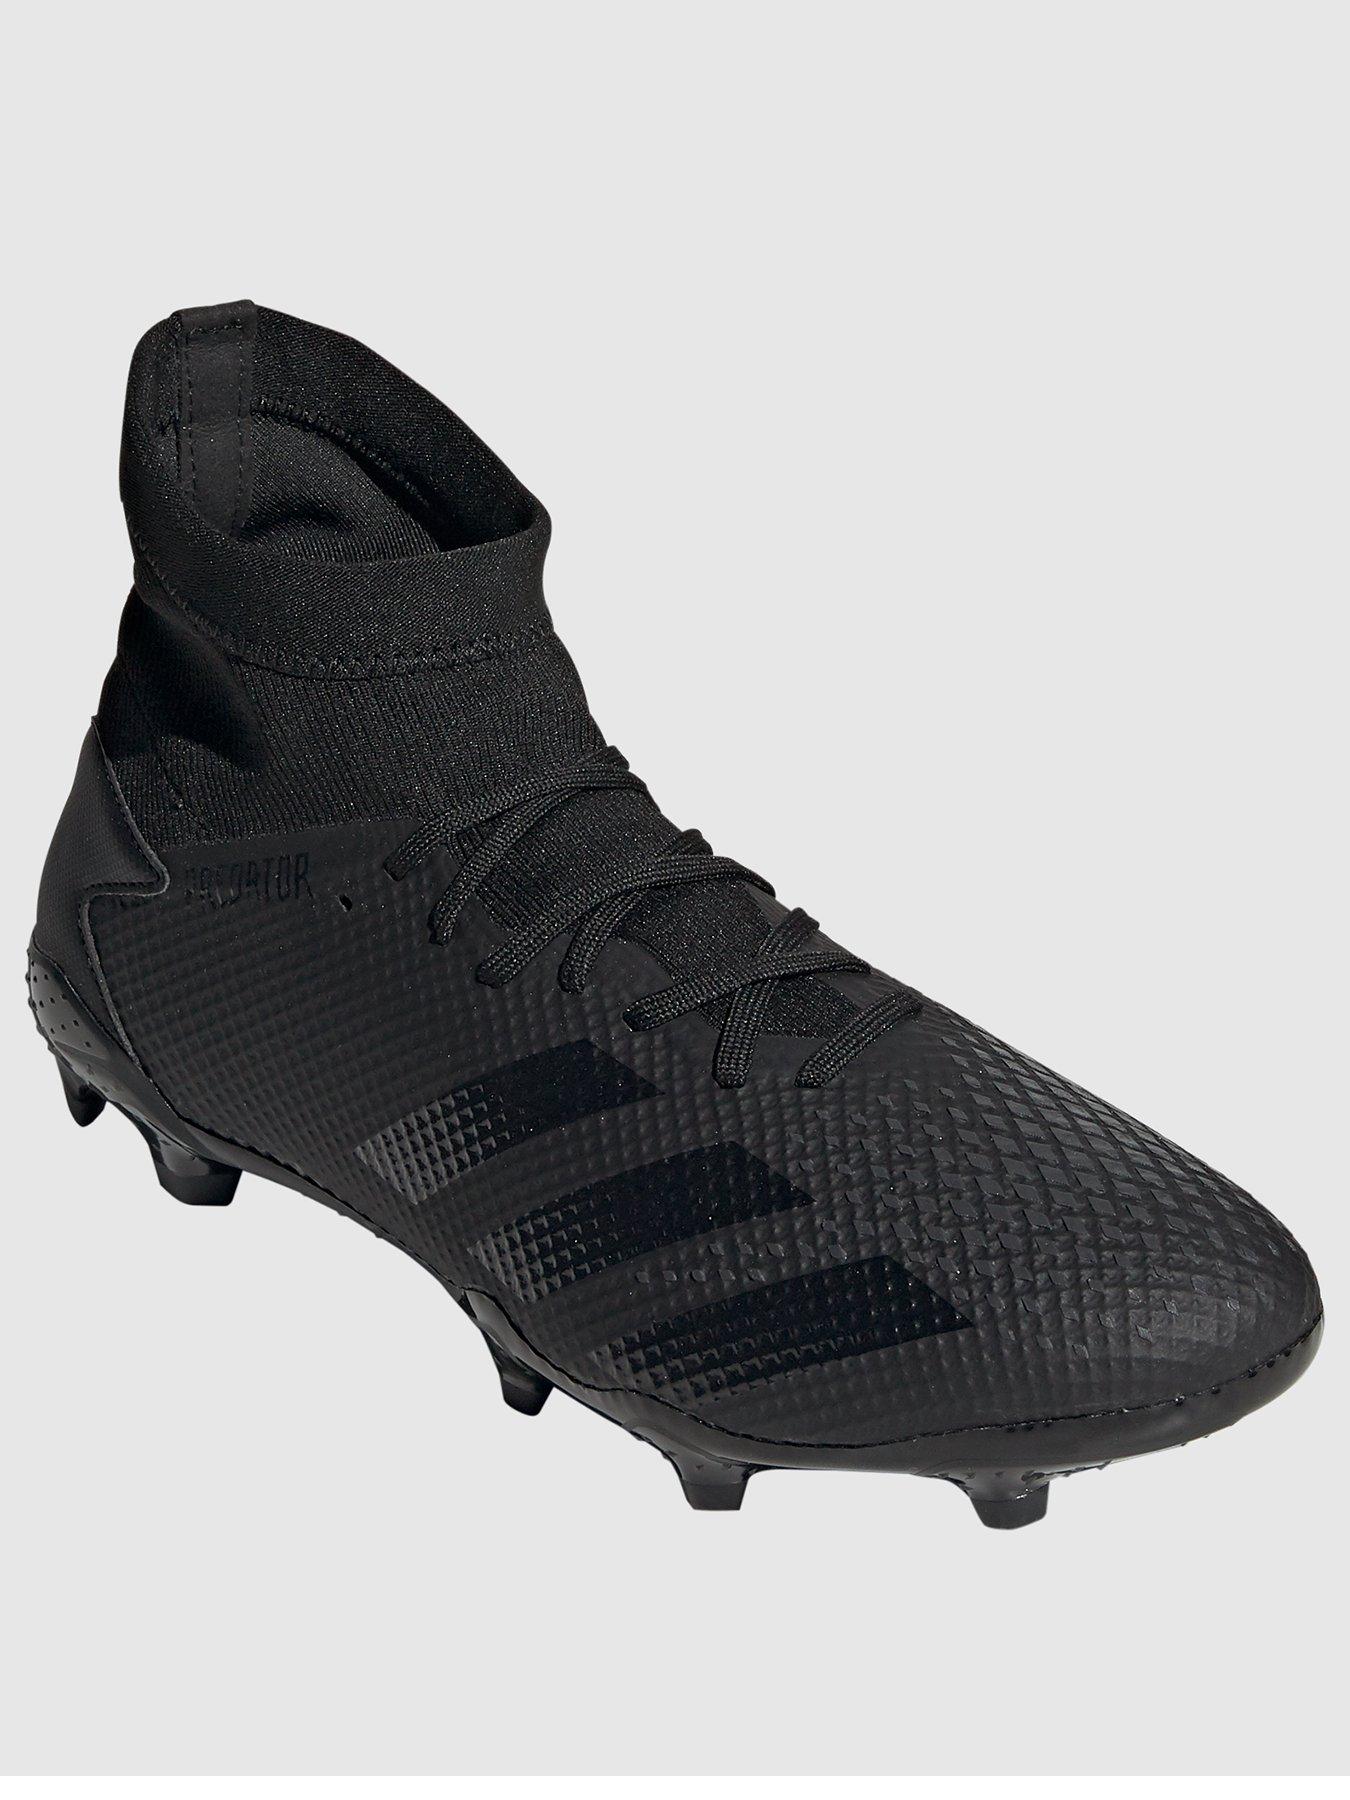 astro turf football boots sports direct for Sale OFF 70%